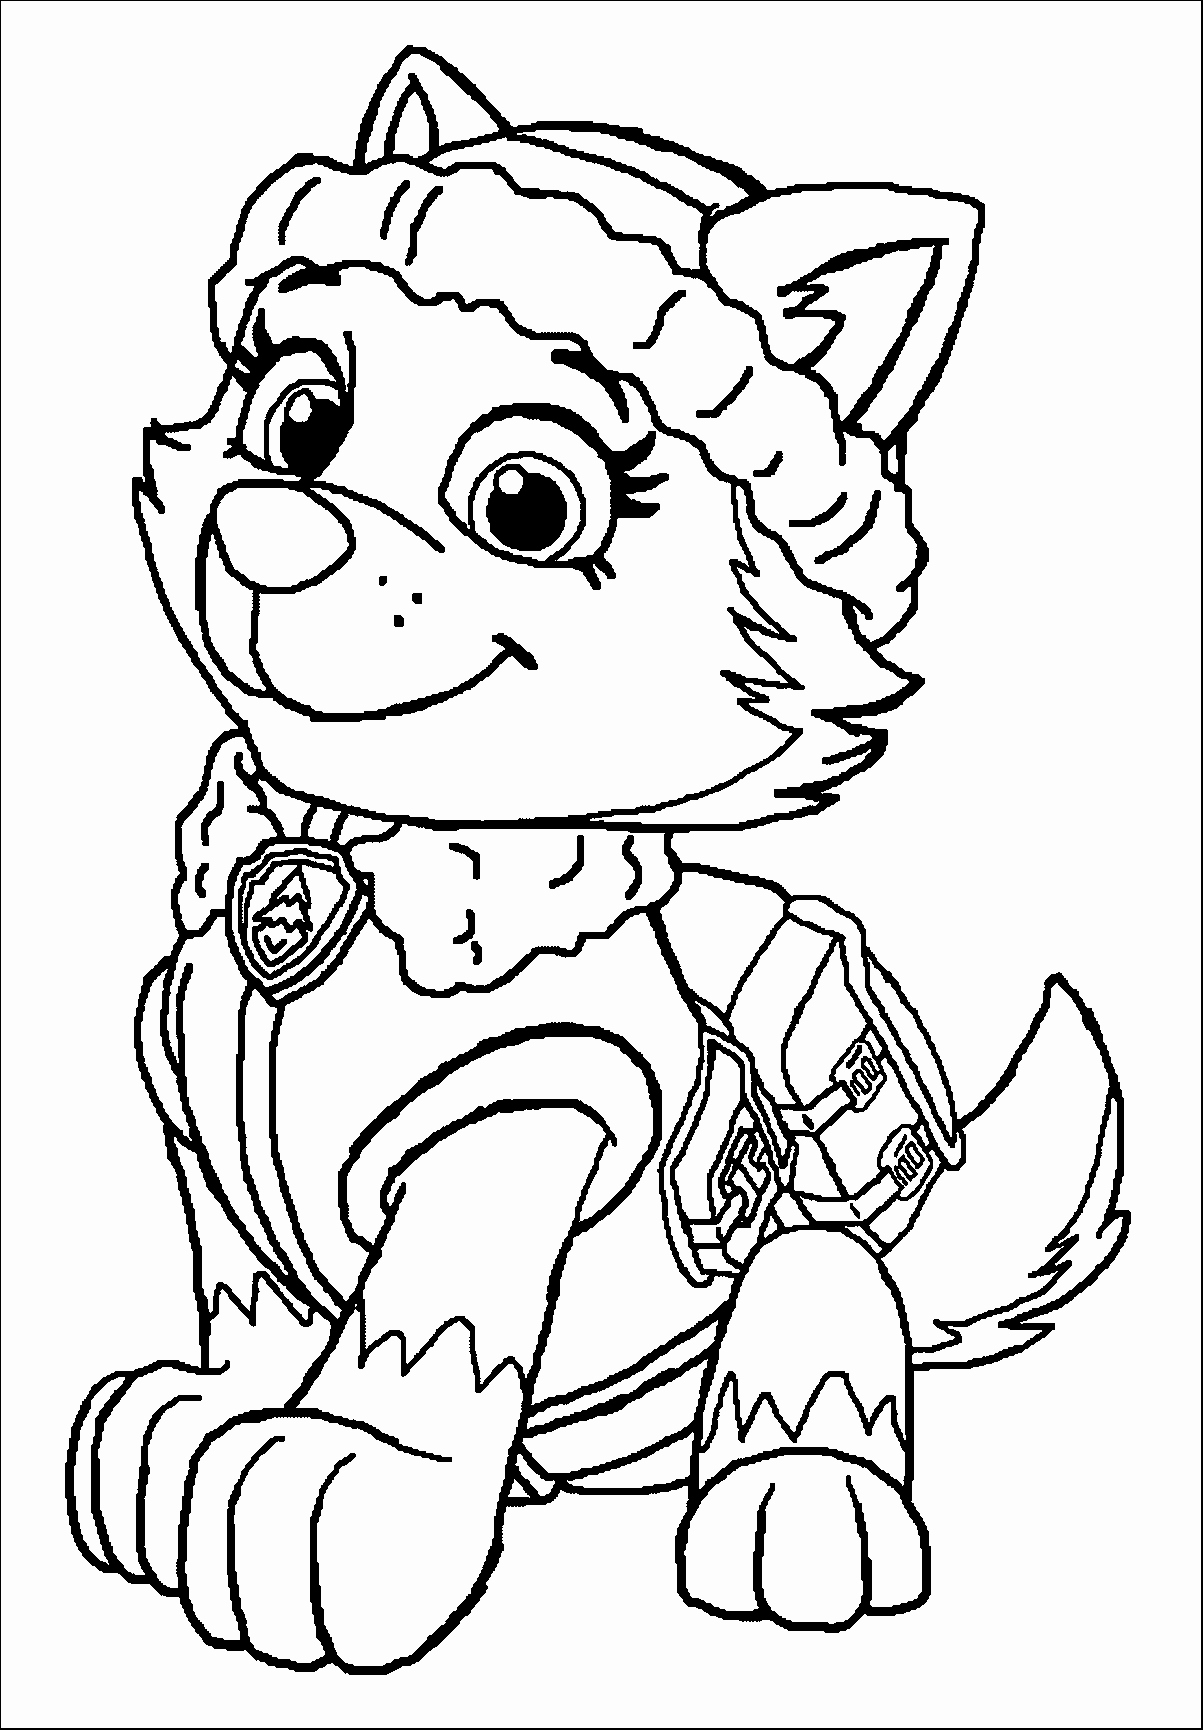 Paw Patrol Coloring Pages FREE Printable 69